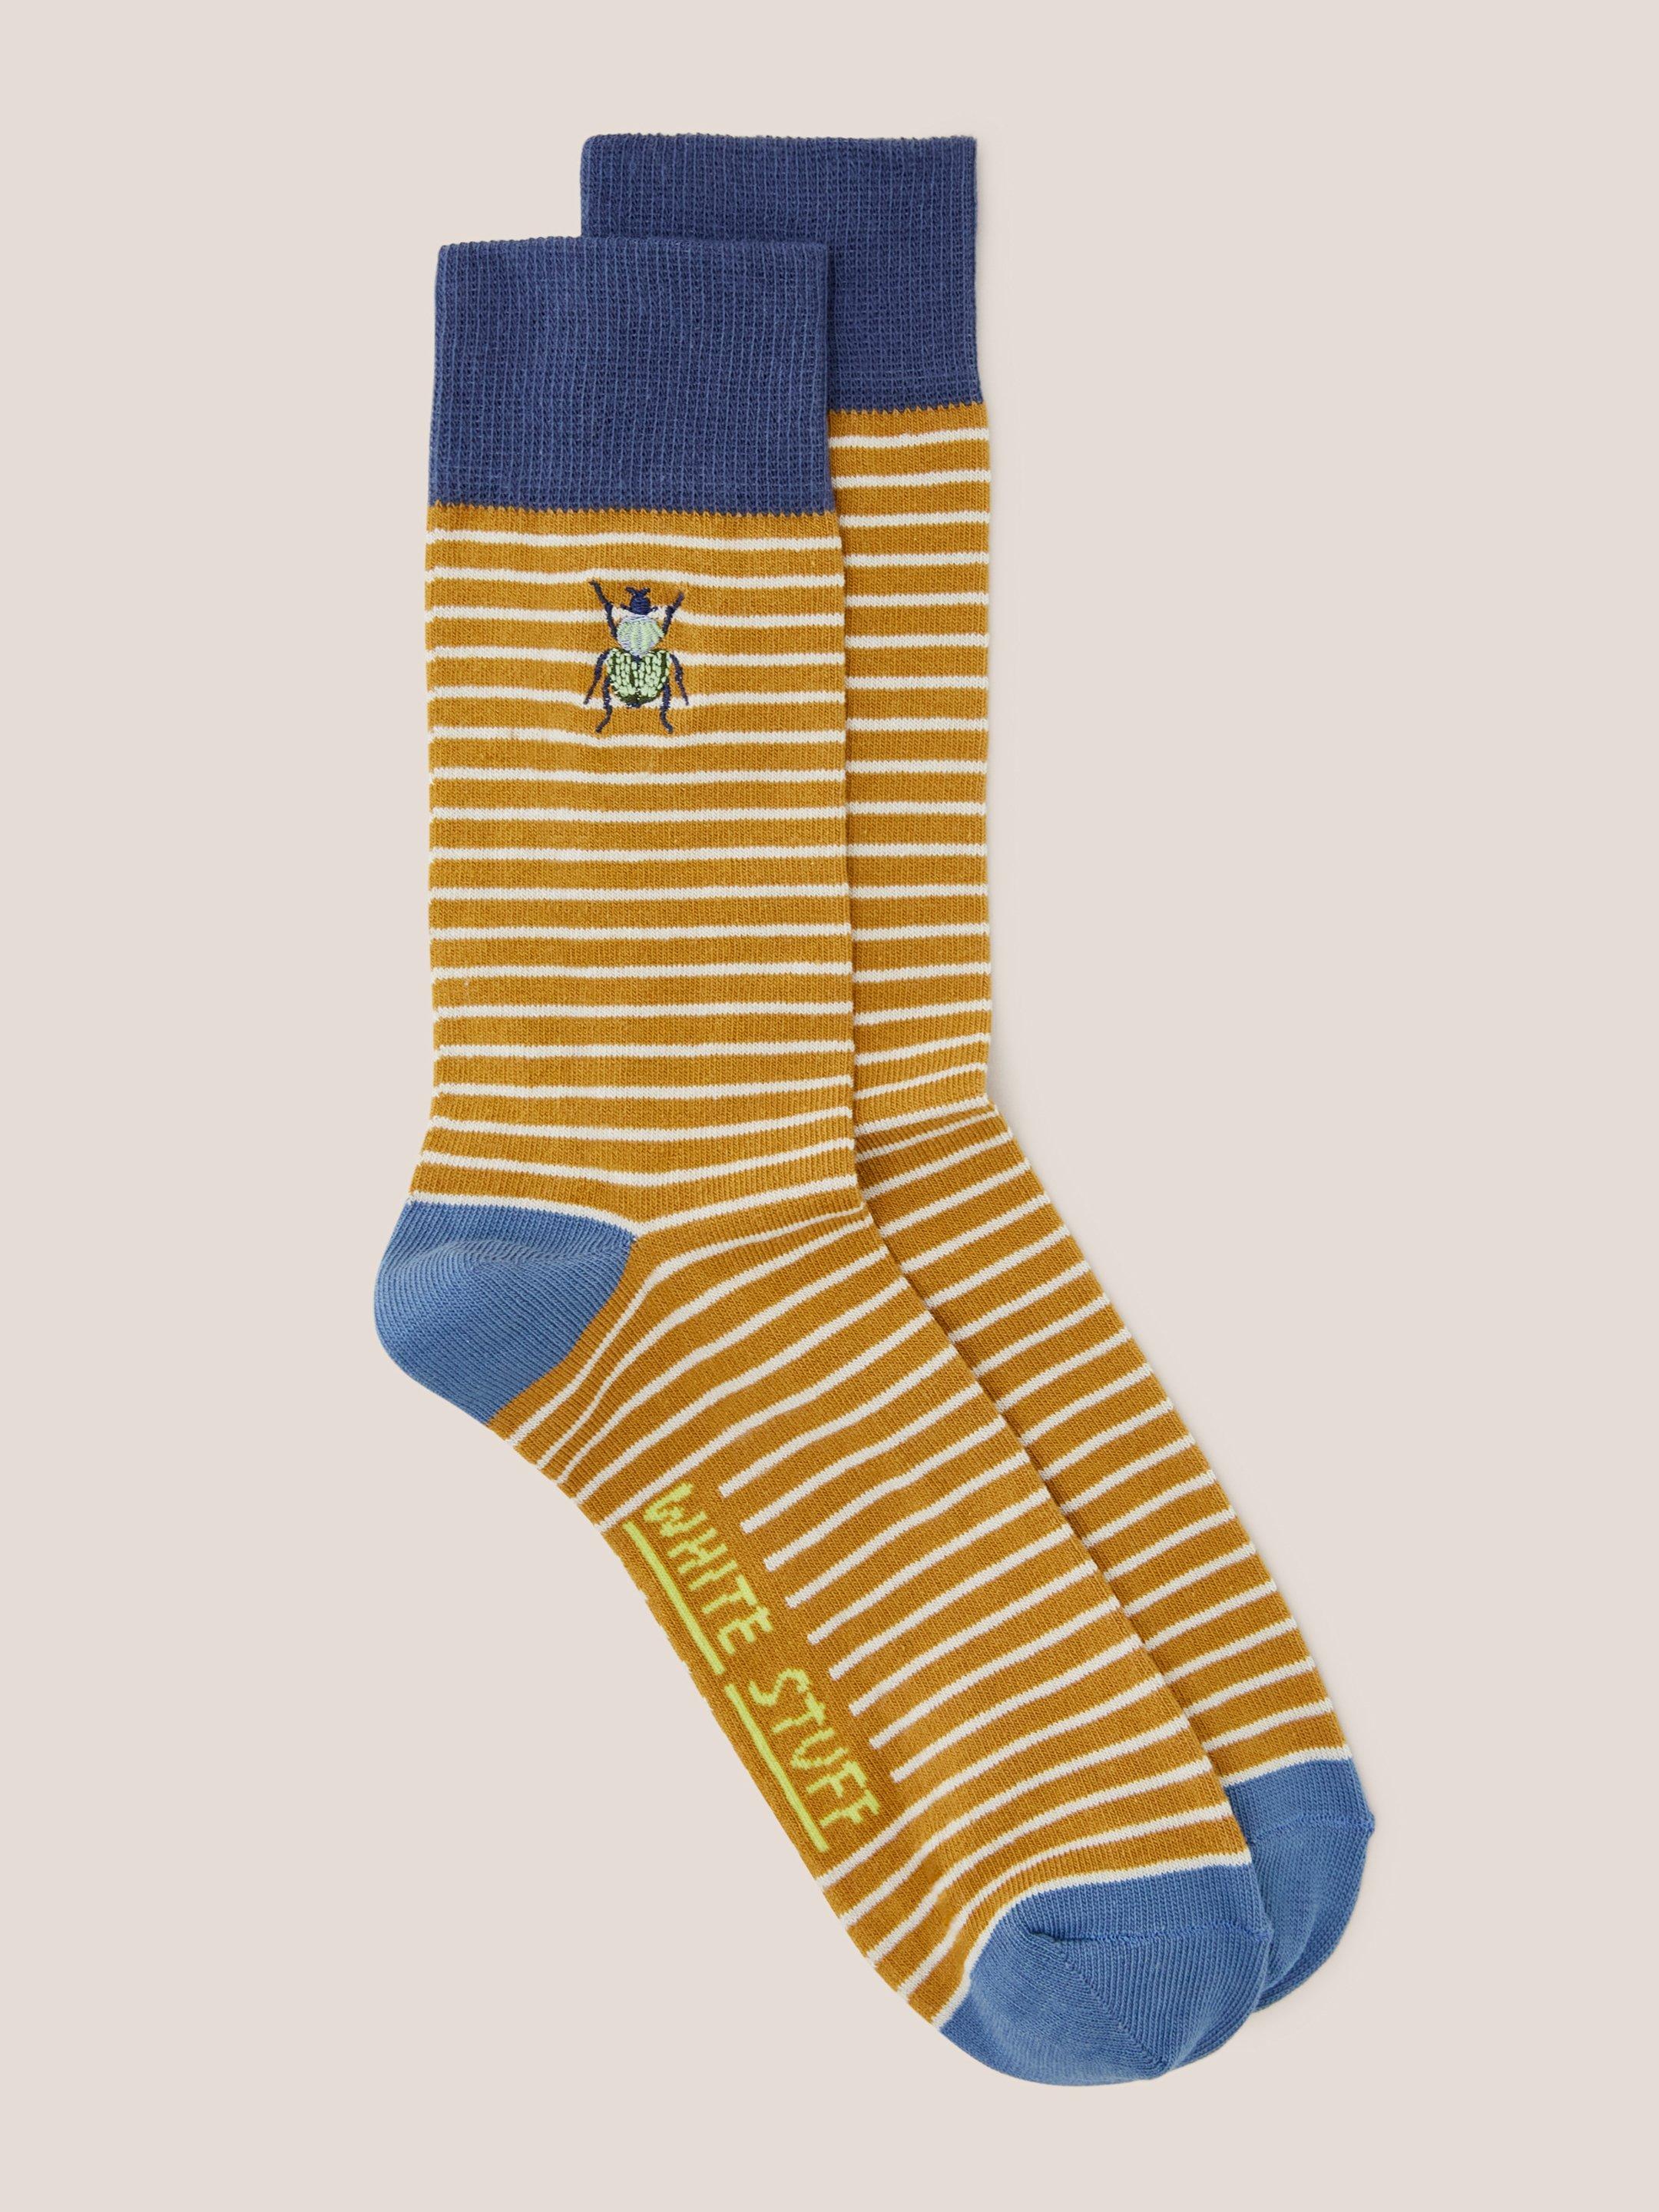 Bug Embroidered Ankle Sock in MID CHART - FLAT FRONT